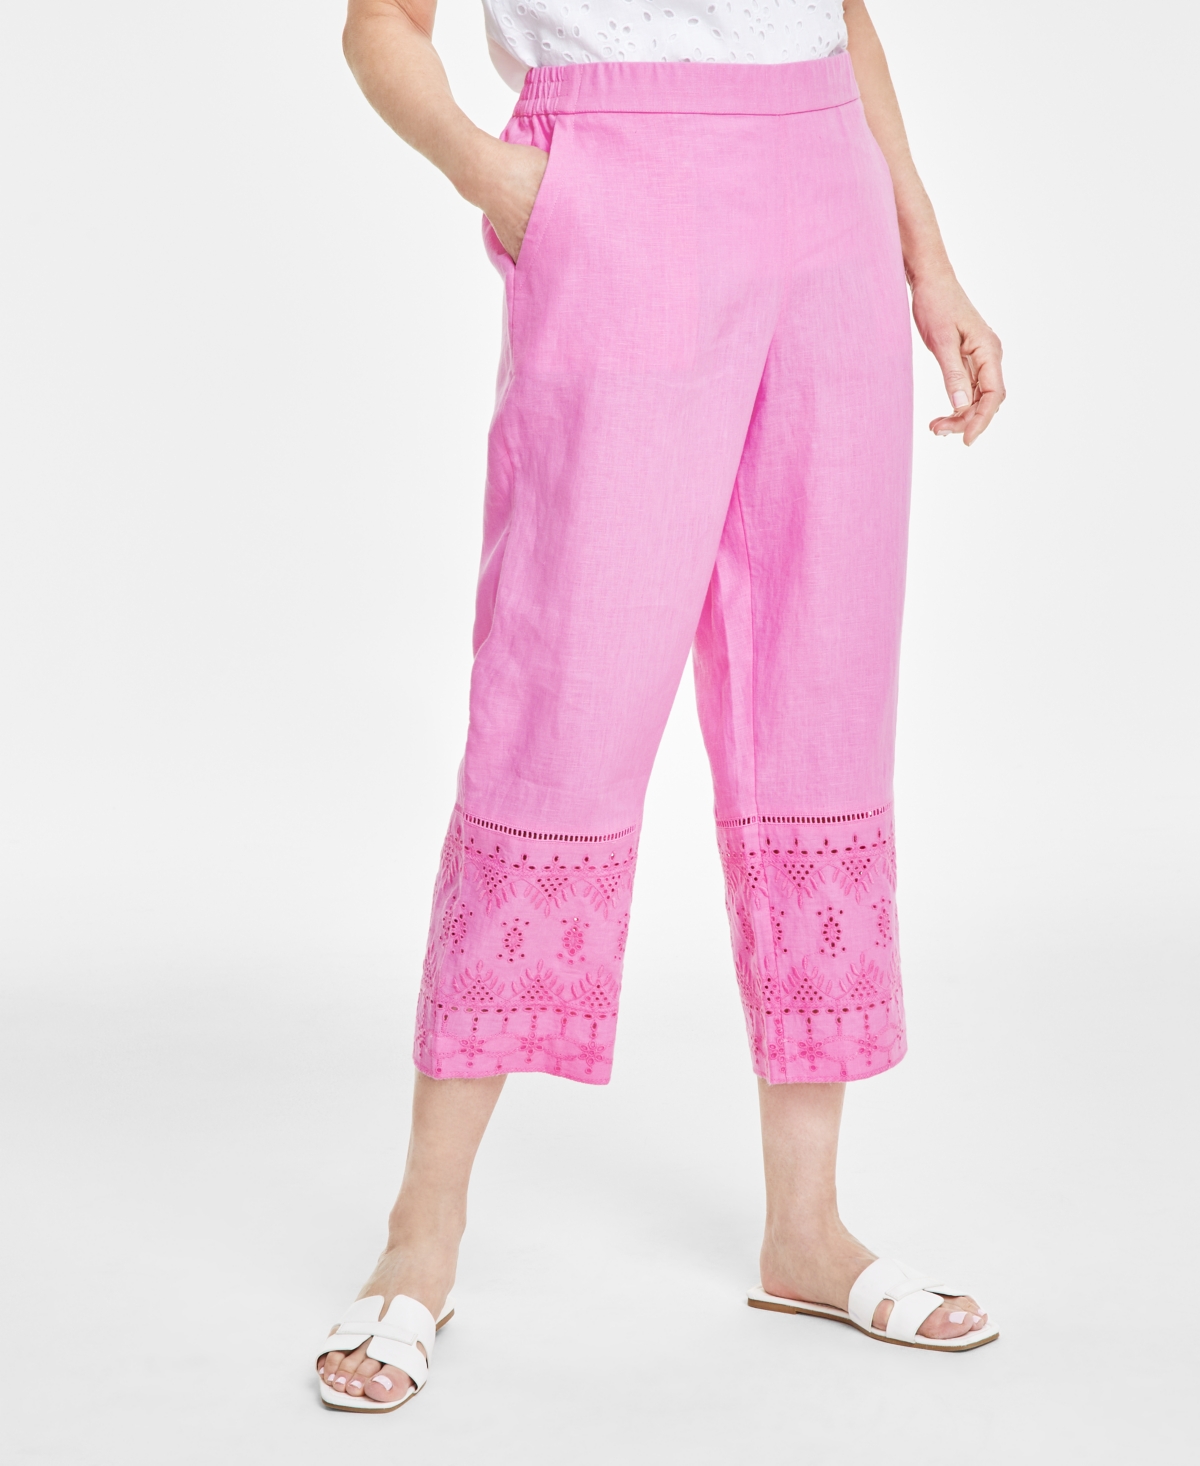 Women's 100% Linen Eyelet-Trim Pull-On Pants, Created for Macy's - Bubble Bath